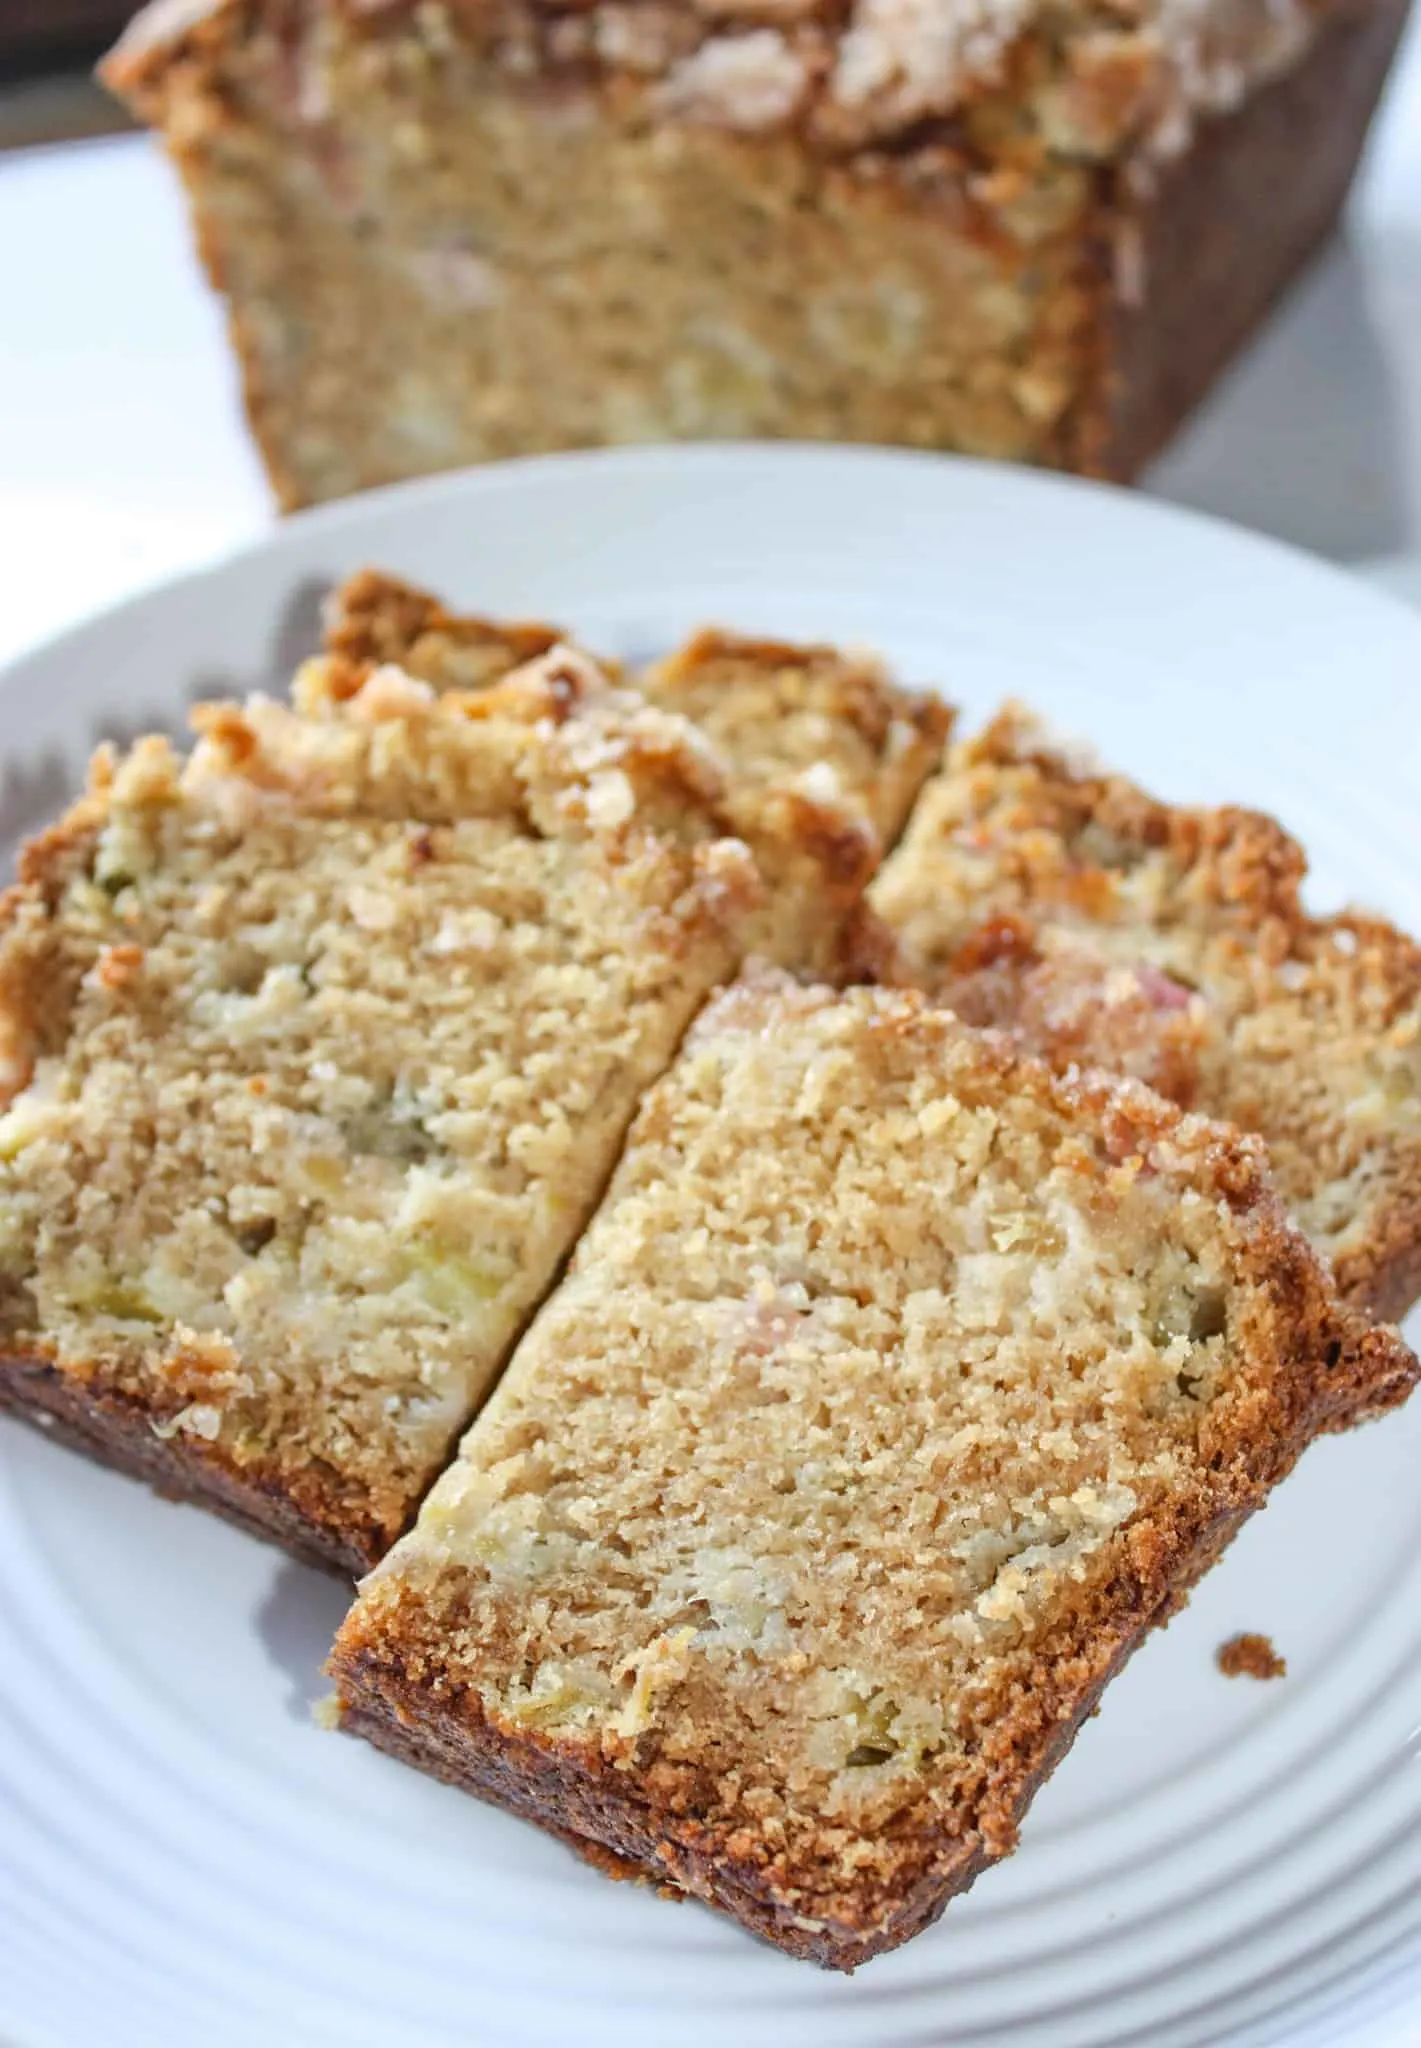 Gluten Free Rhubarb Loaf is a tasty option to use seasonal rhubarb.  This moist bread makes a great snack to pair with your favourite beverage.